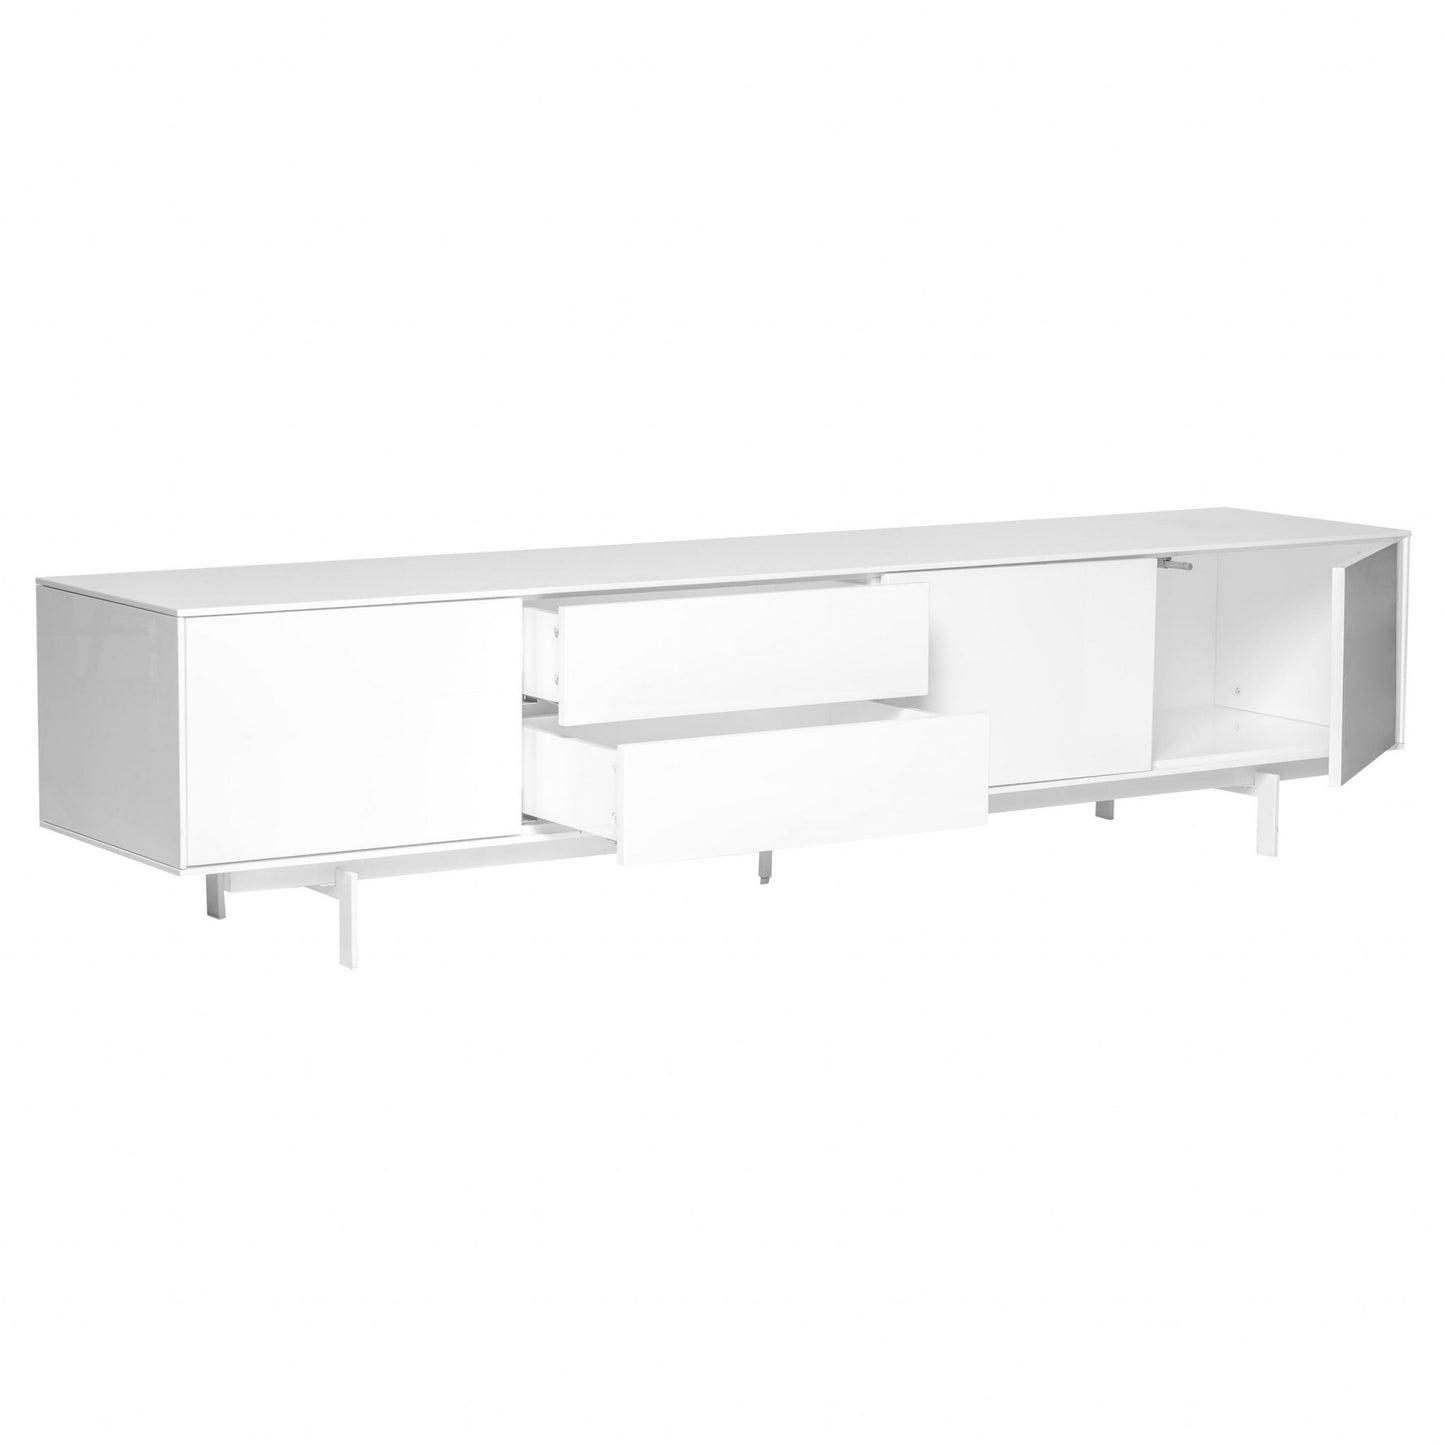 82" White Manufactured And Wood Cabinet Enclosed Storage TV Stand